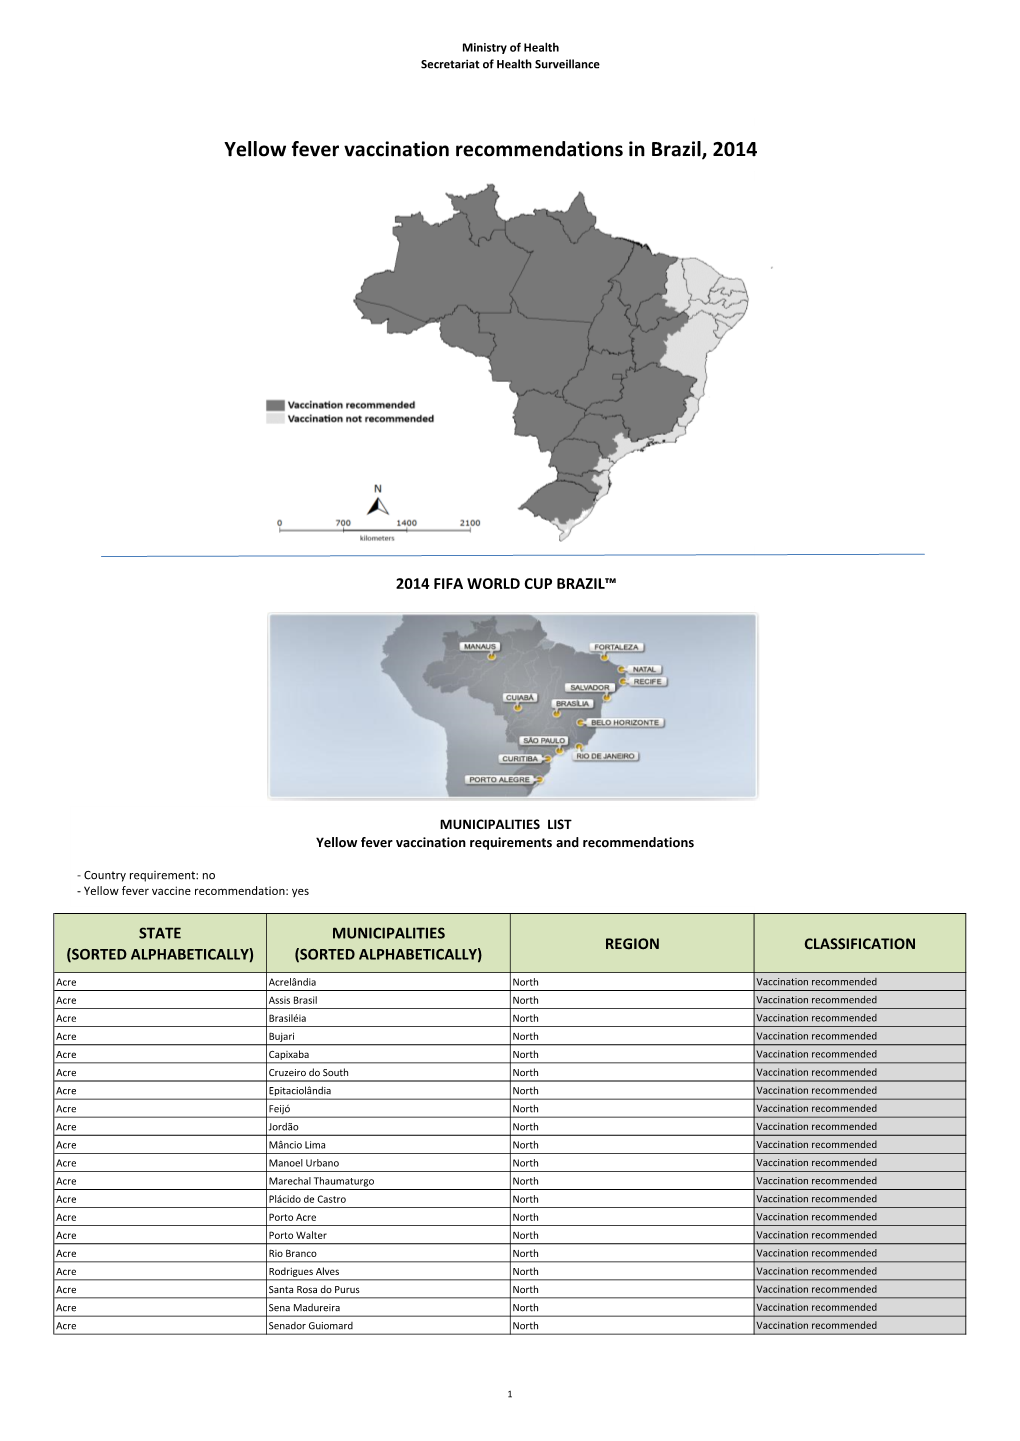 Yellow Fever Vaccination Recommendations in Brazil, 2014